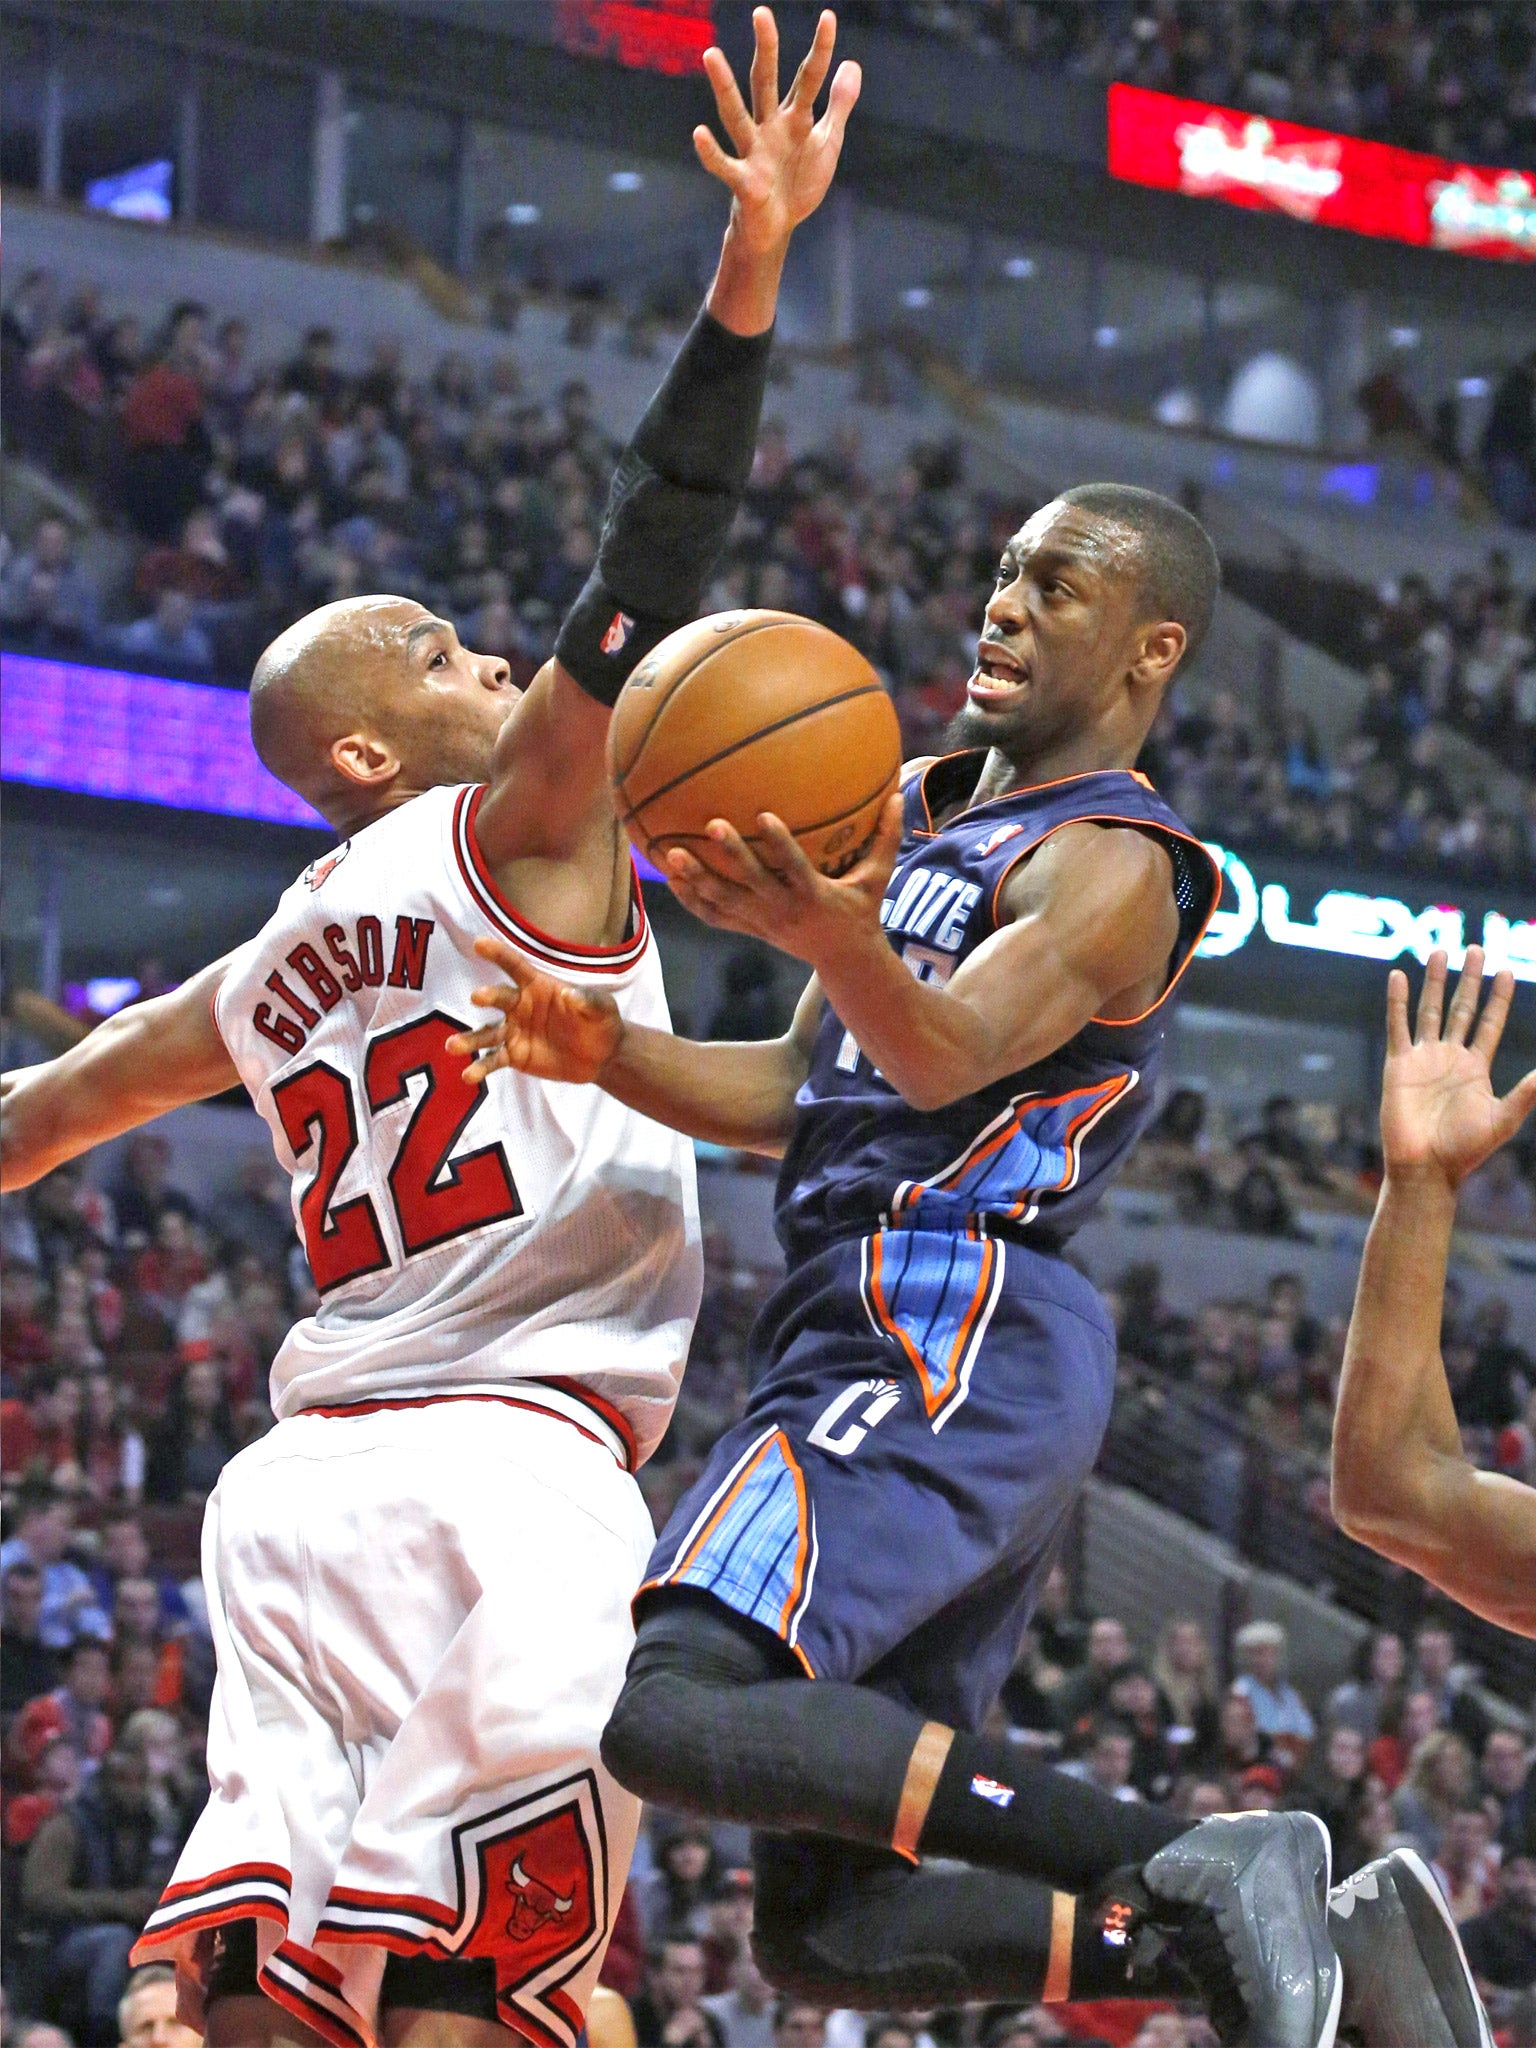 Kemba Walker scored 18 points for the Charlotte Bobcats